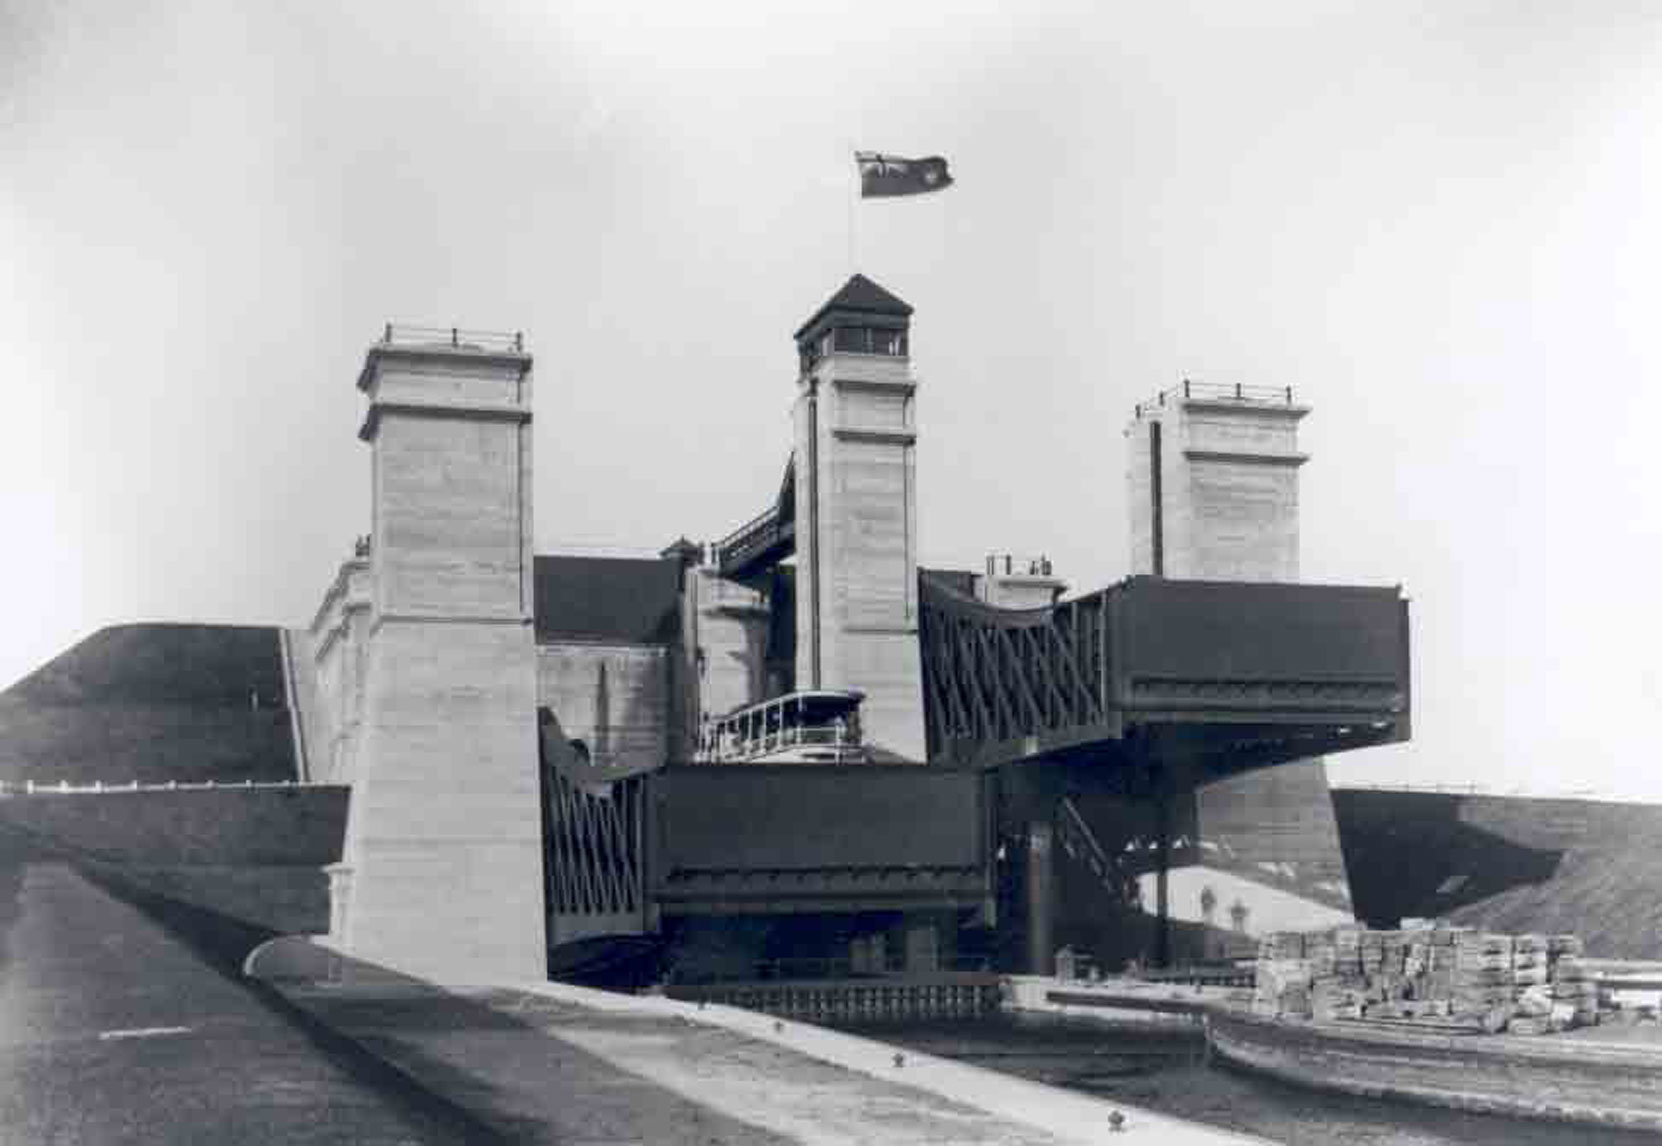 The Peterborough Lift Lock in 1904 (photo courtesy of Parks Canada)